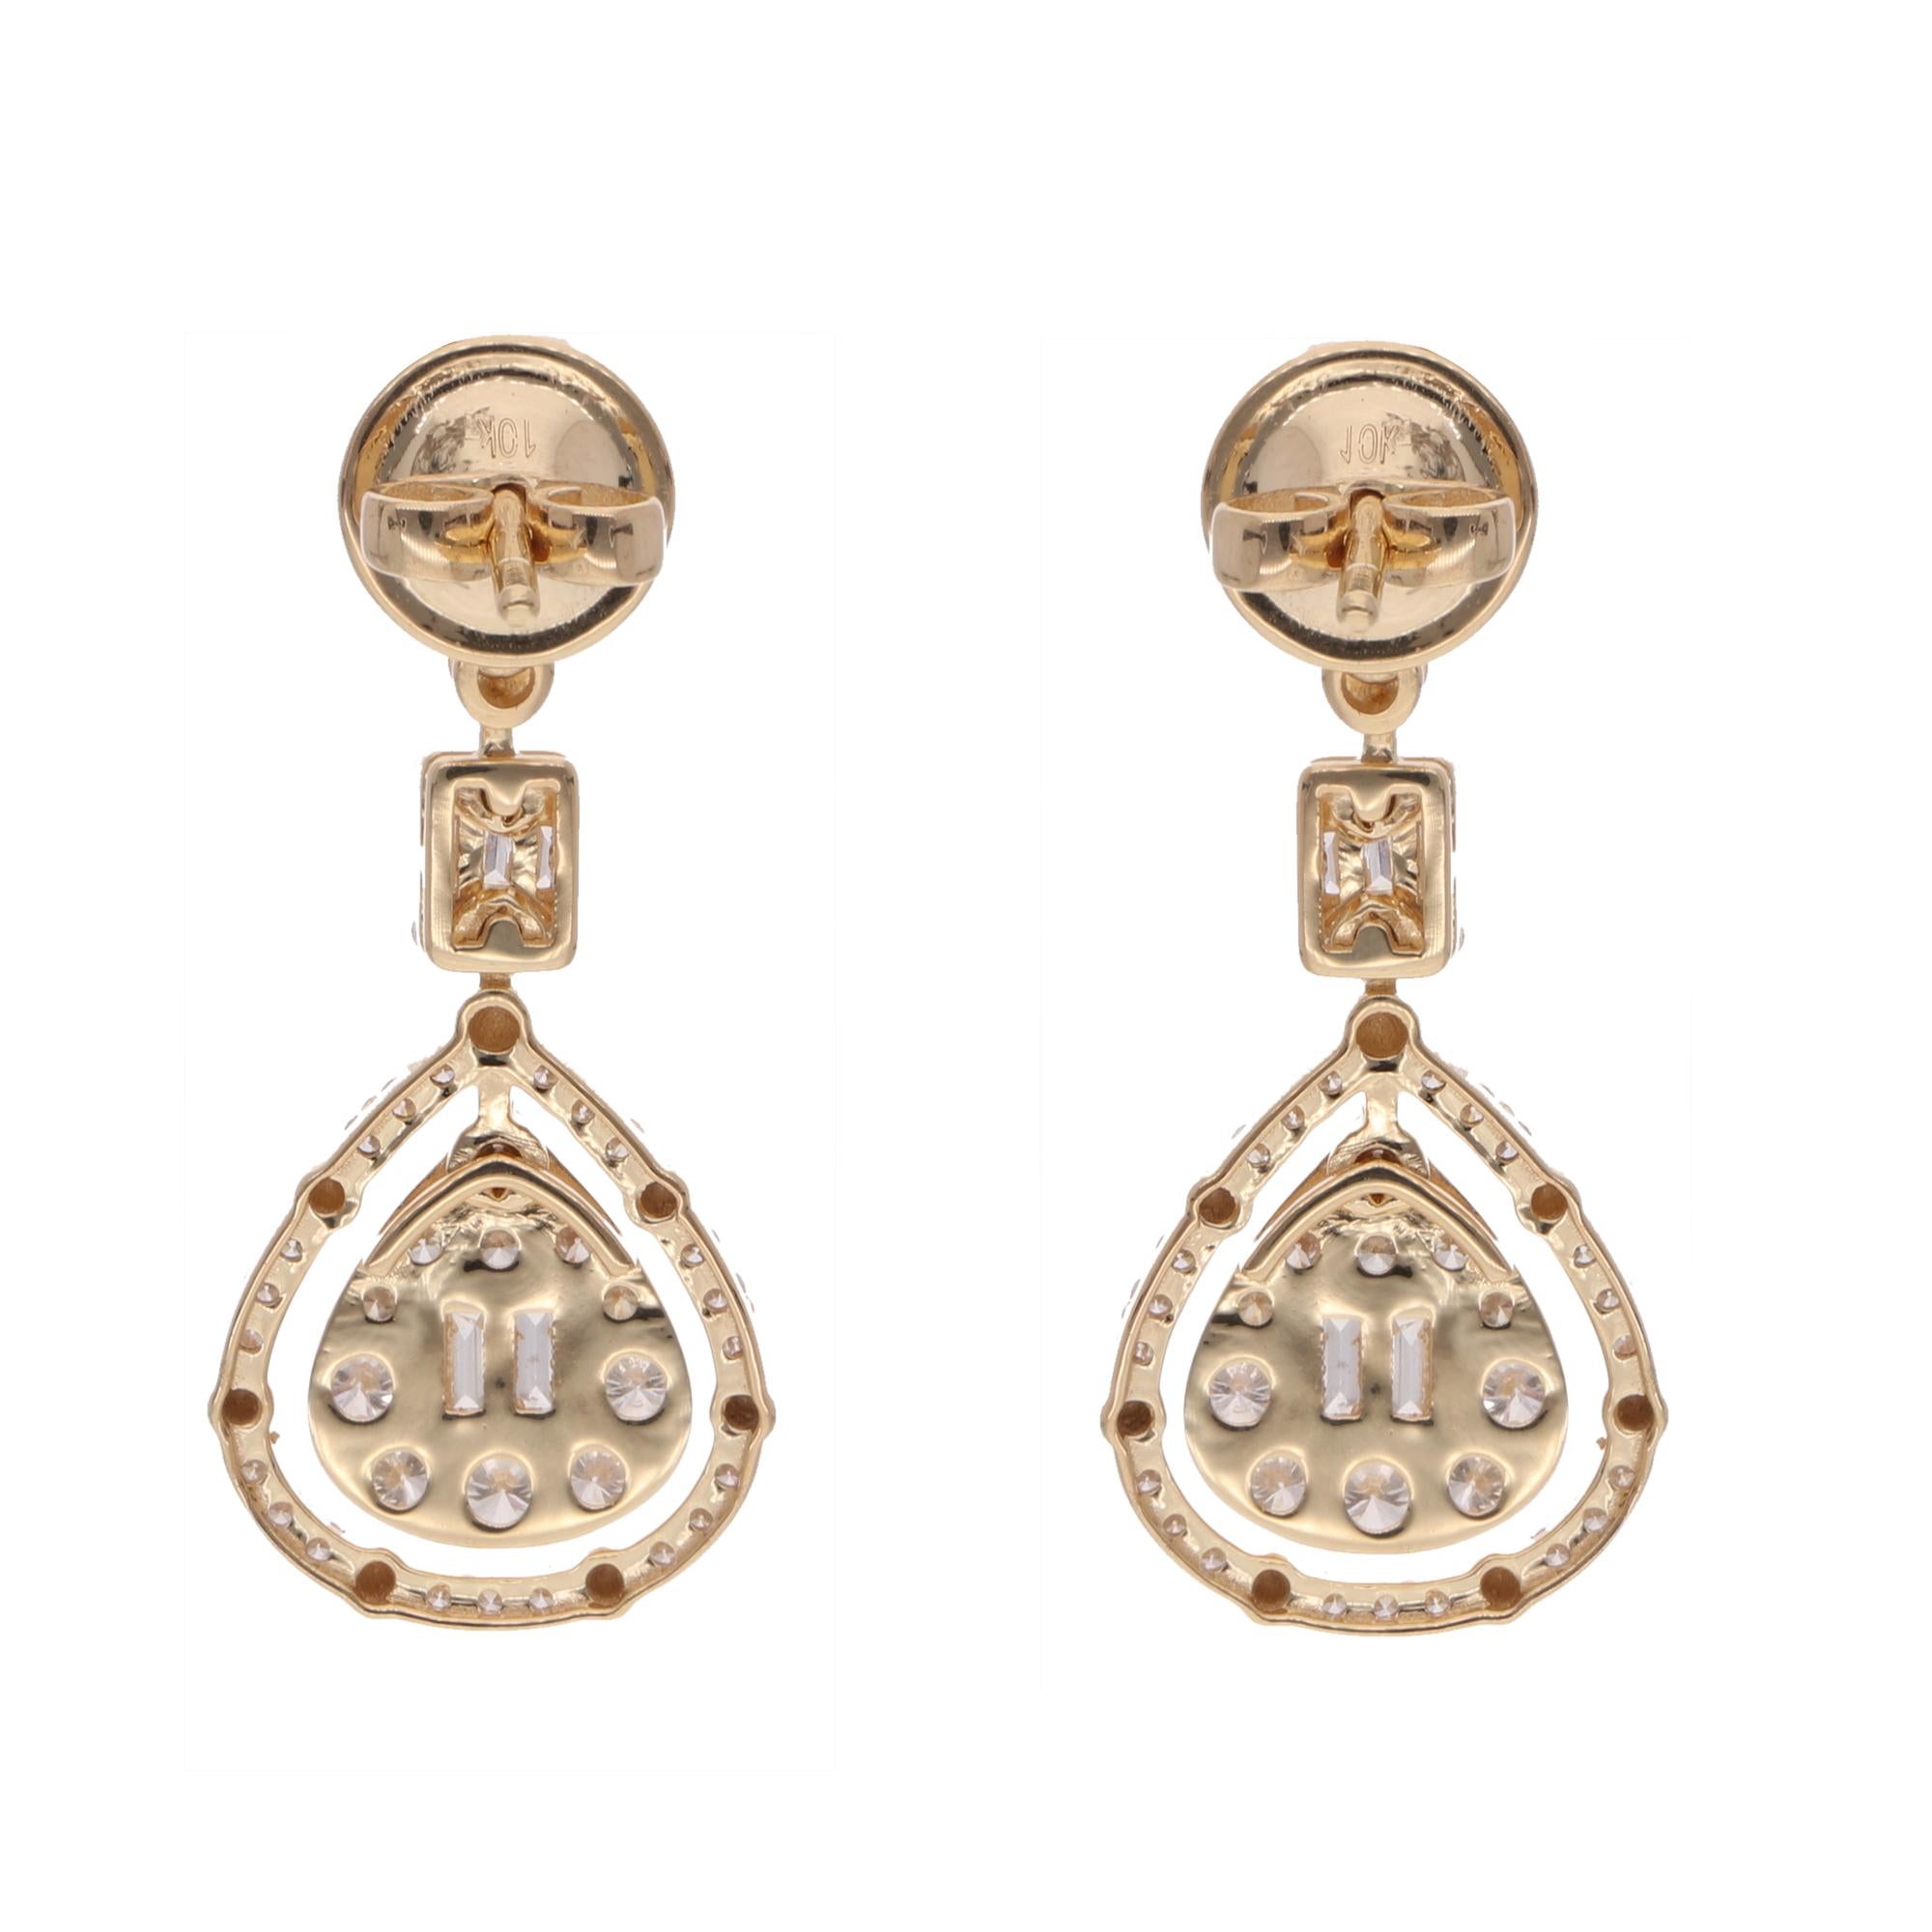 Item Code :- STE-1105
Gross Weight :_ 3.58 gm
10k Solid Yellow Gold Weight :- 3.34 gm
Natural Diamond Weight :- 1.20 carat  ( AVERAGE DIAMOND CLARITY SI1-SI2 & COLOR H-I )
Earrings Size :- 27 x 8 mm approx.

✦ Sizing
.....................
We can